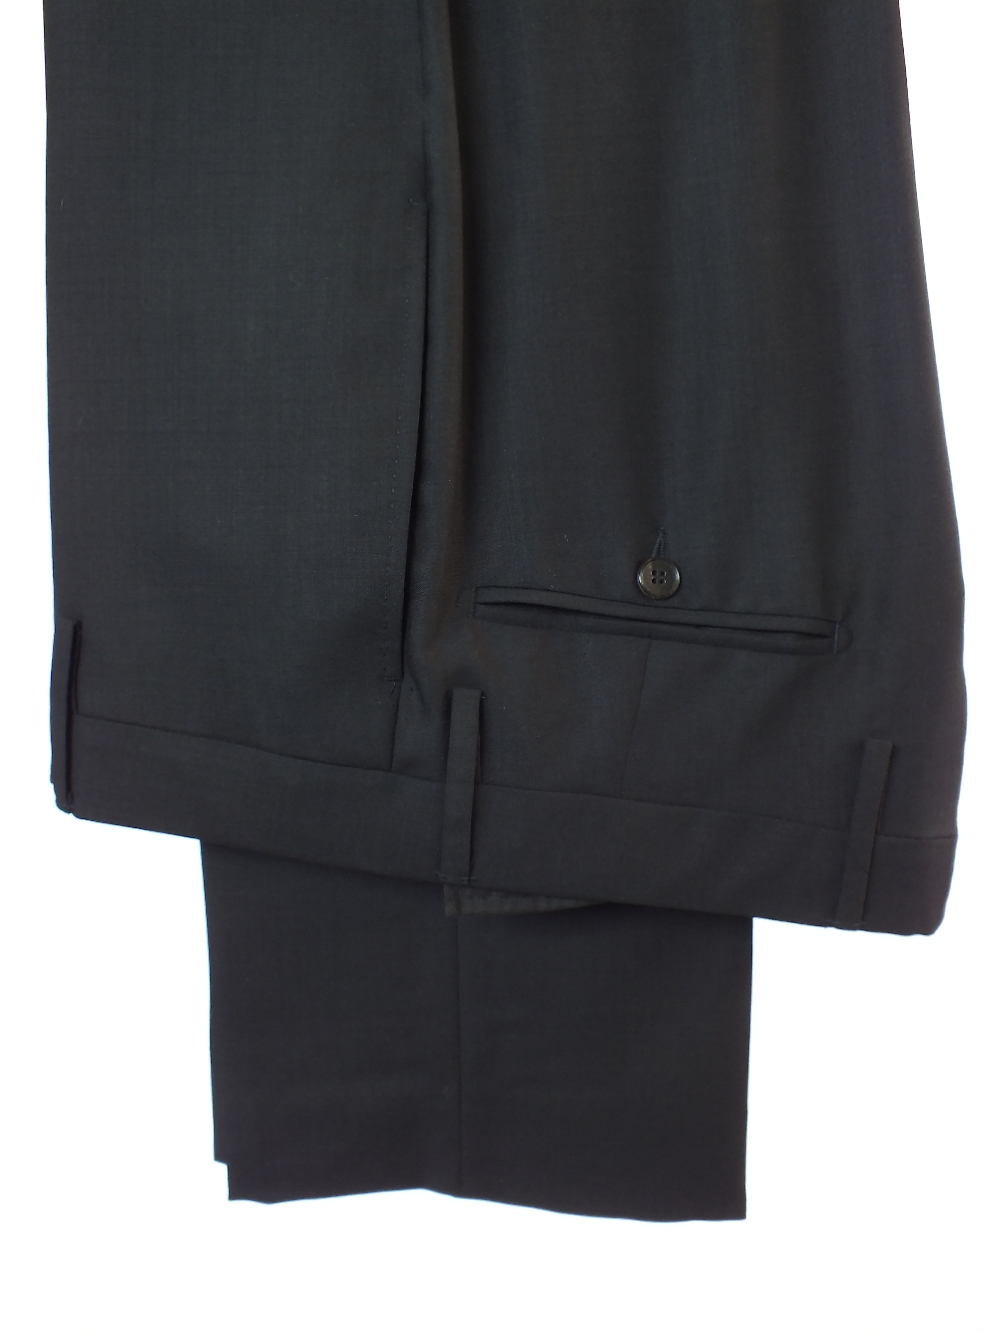 A Gucci suit, black, double vent, Italian size 50R, 75% wool, 25% mohair. Flat front, button fly - Image 5 of 6